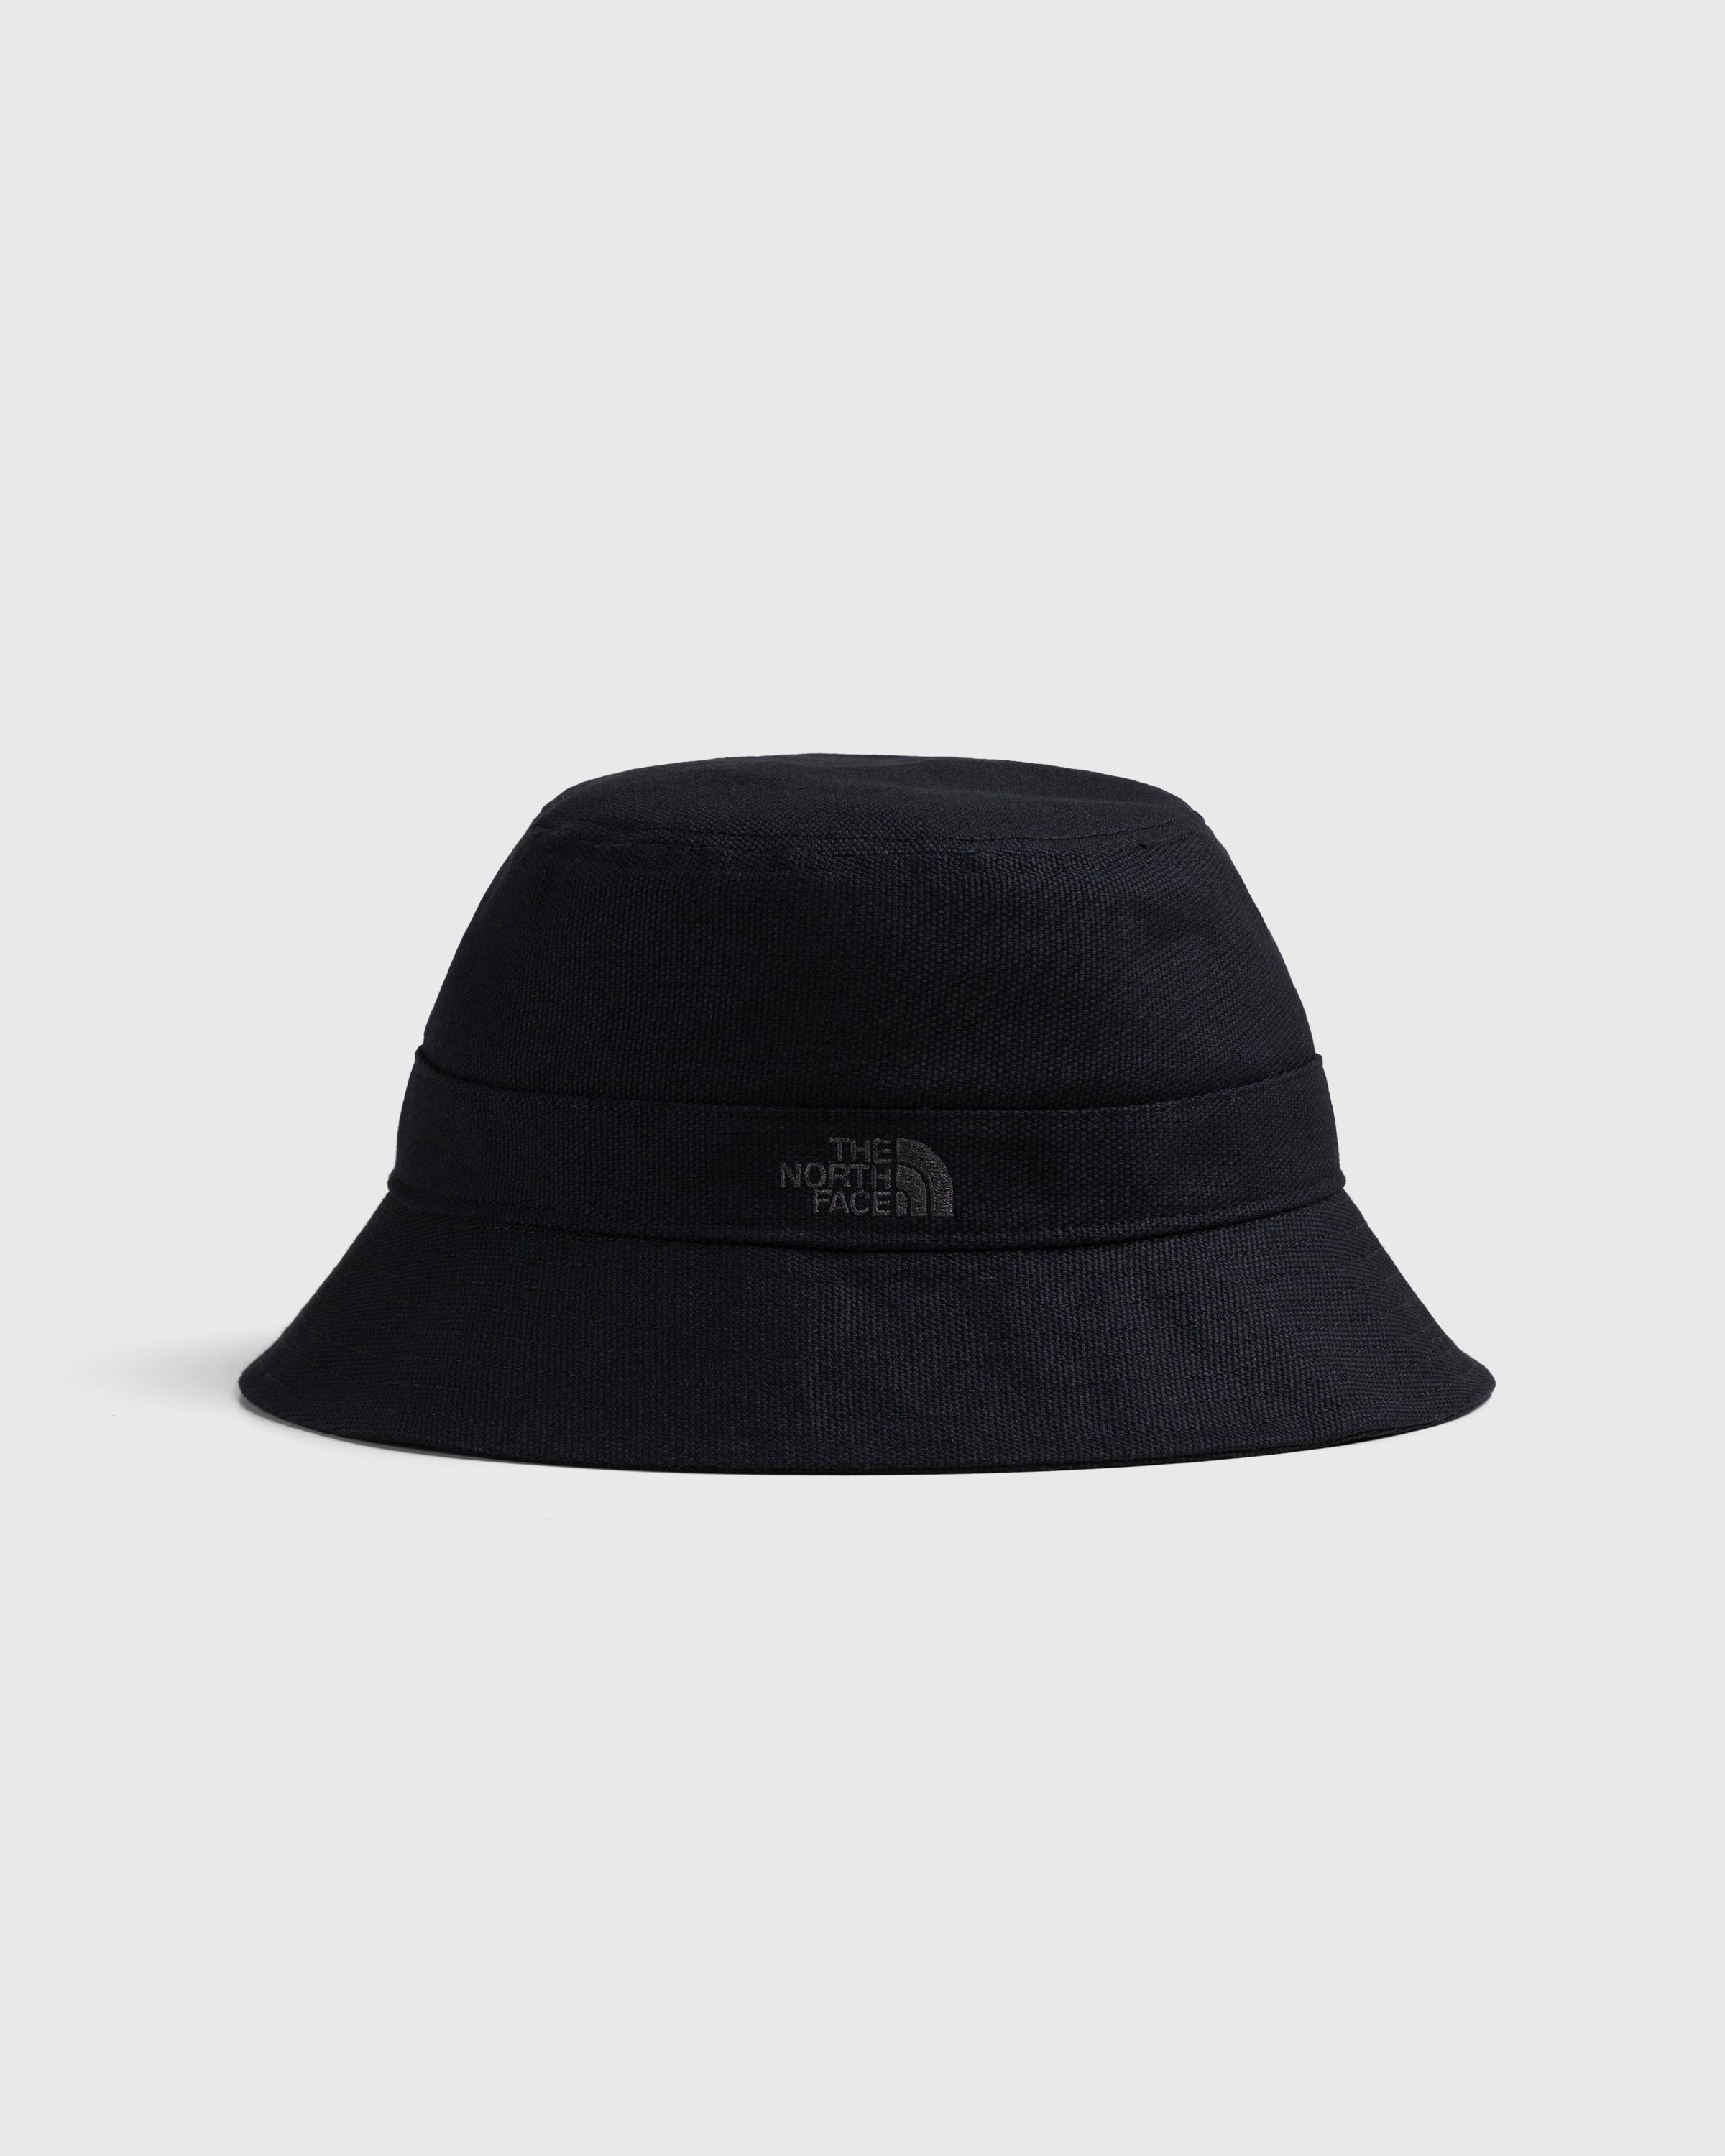 The North Face - Mountain Bucket Hat TNF Black - Accessories - Black - Image 1